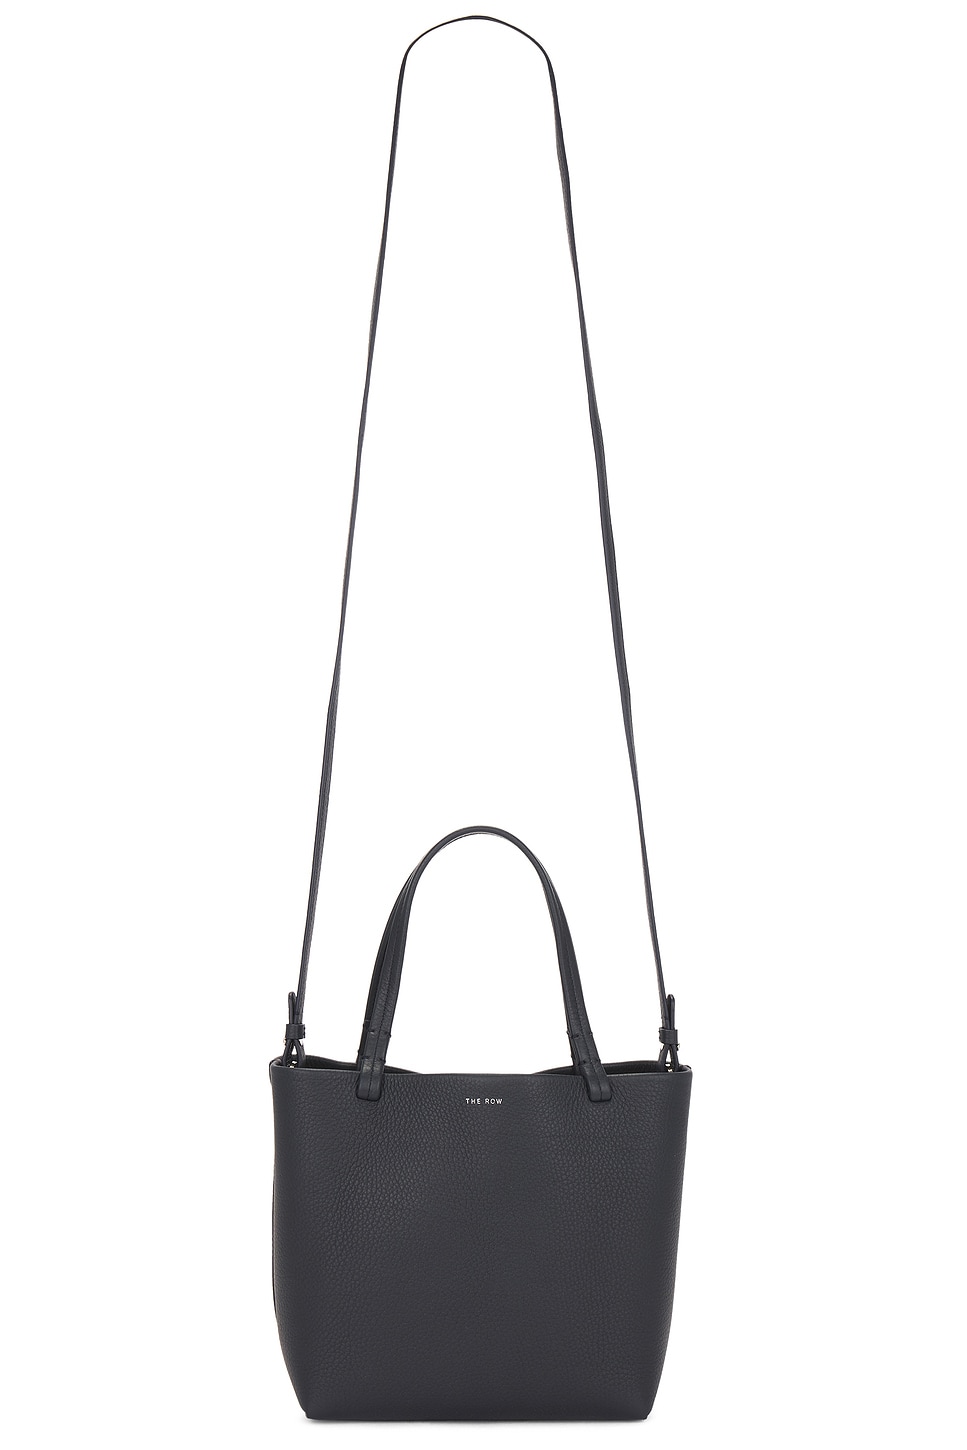 Park Tote Small in Navy